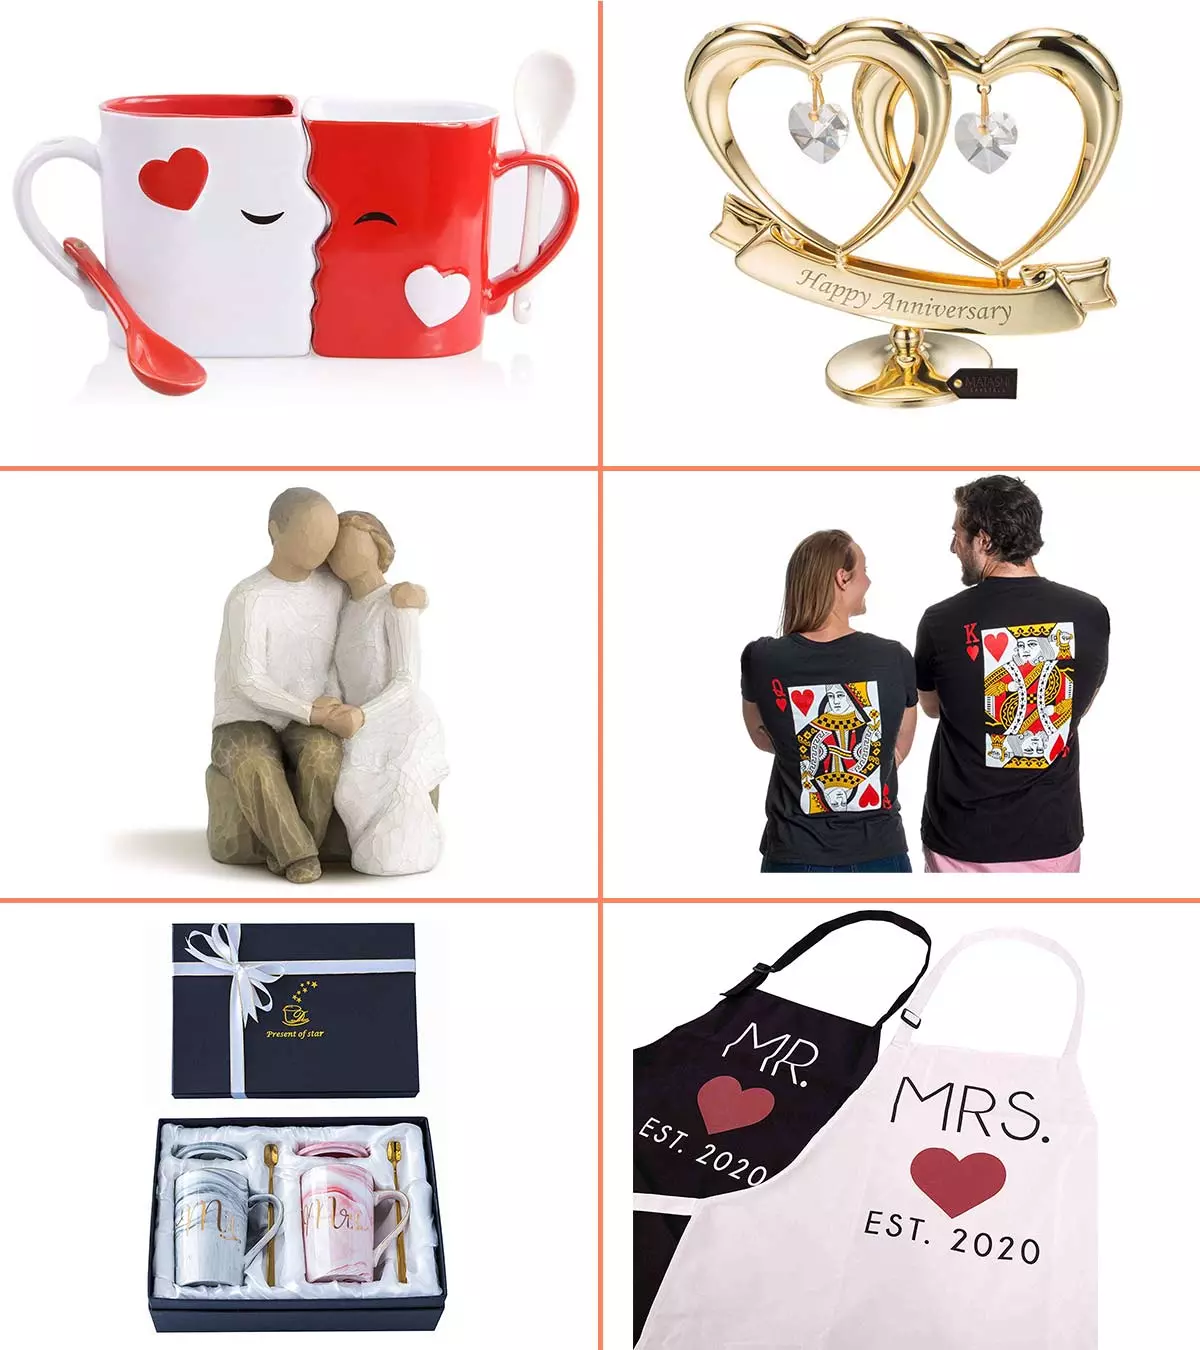 Best Wedding Anniversary Gifts To Buy